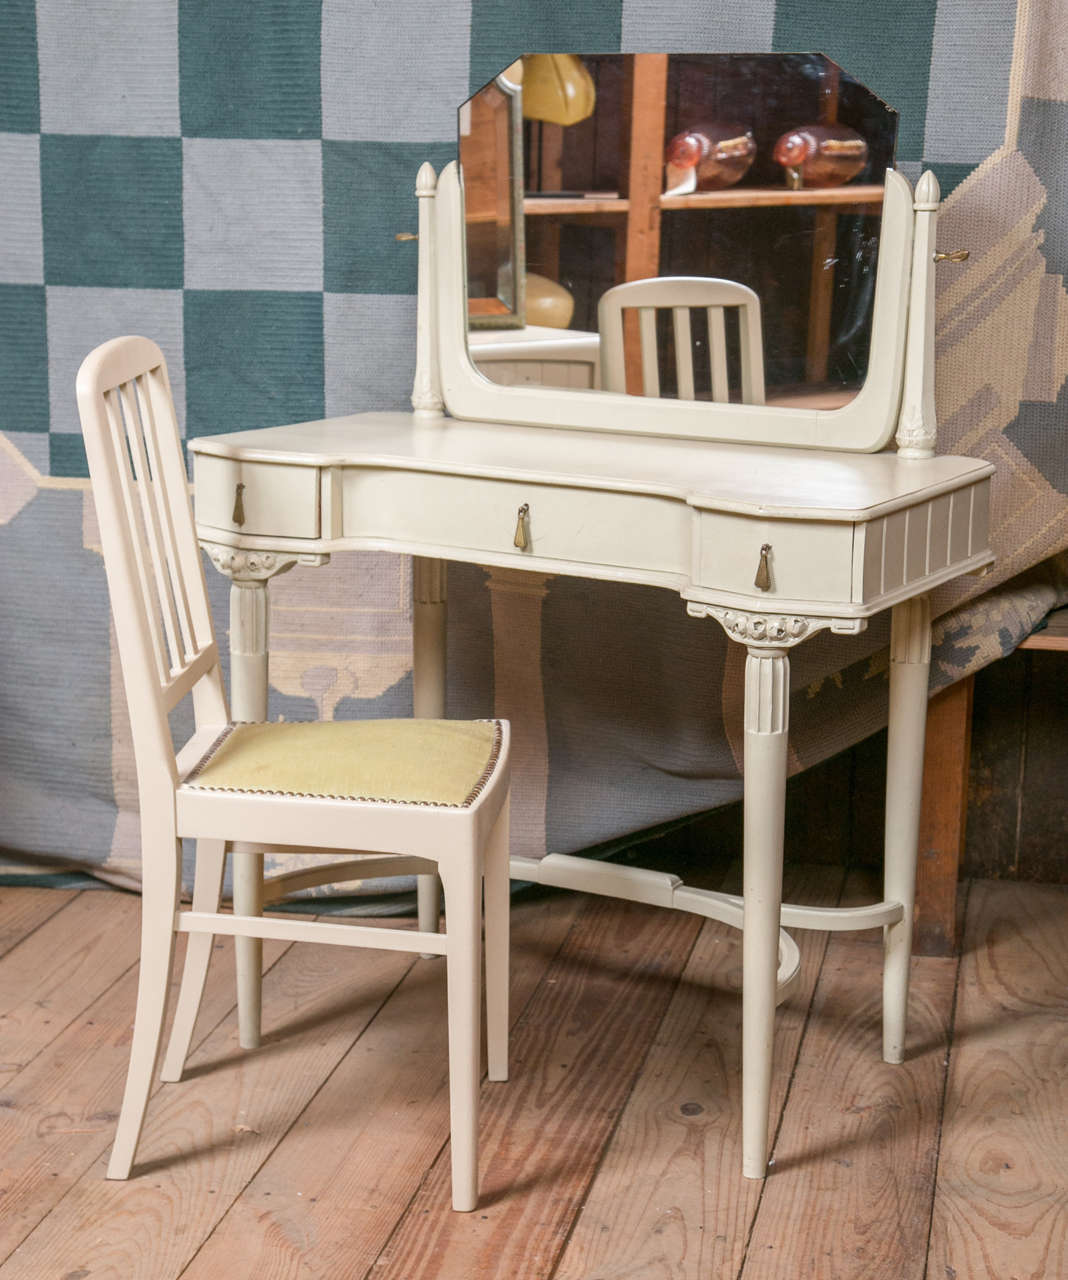 Charming French Art Deco dressing table and chair. Table height is 29.75. Chair is 15 W x 16 D x 35.5 H x 17 SH.